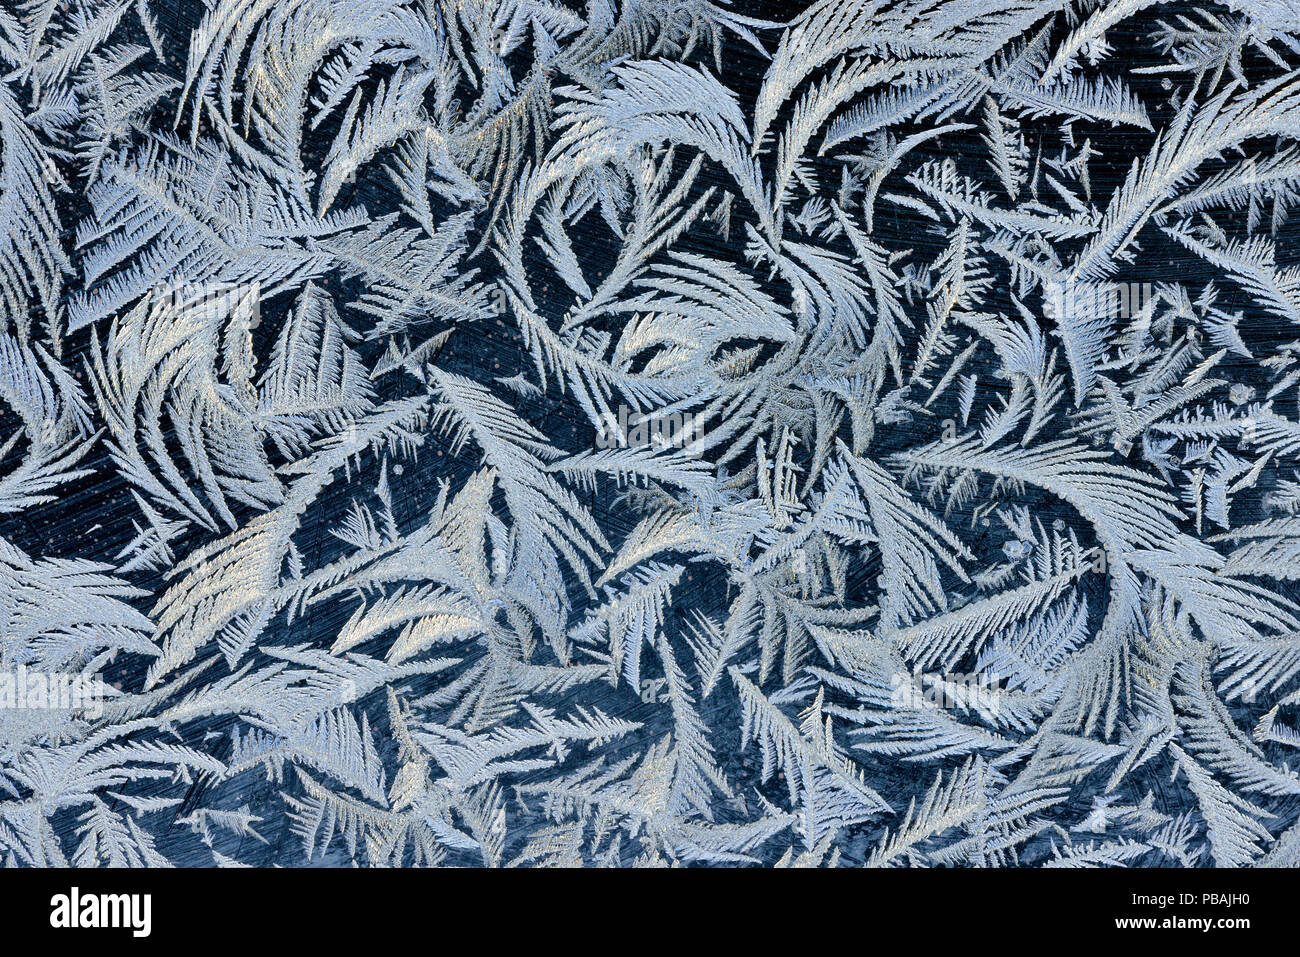 Frost patterns on a window, Greater Sudbury, Ontario, Canada Stock Photo